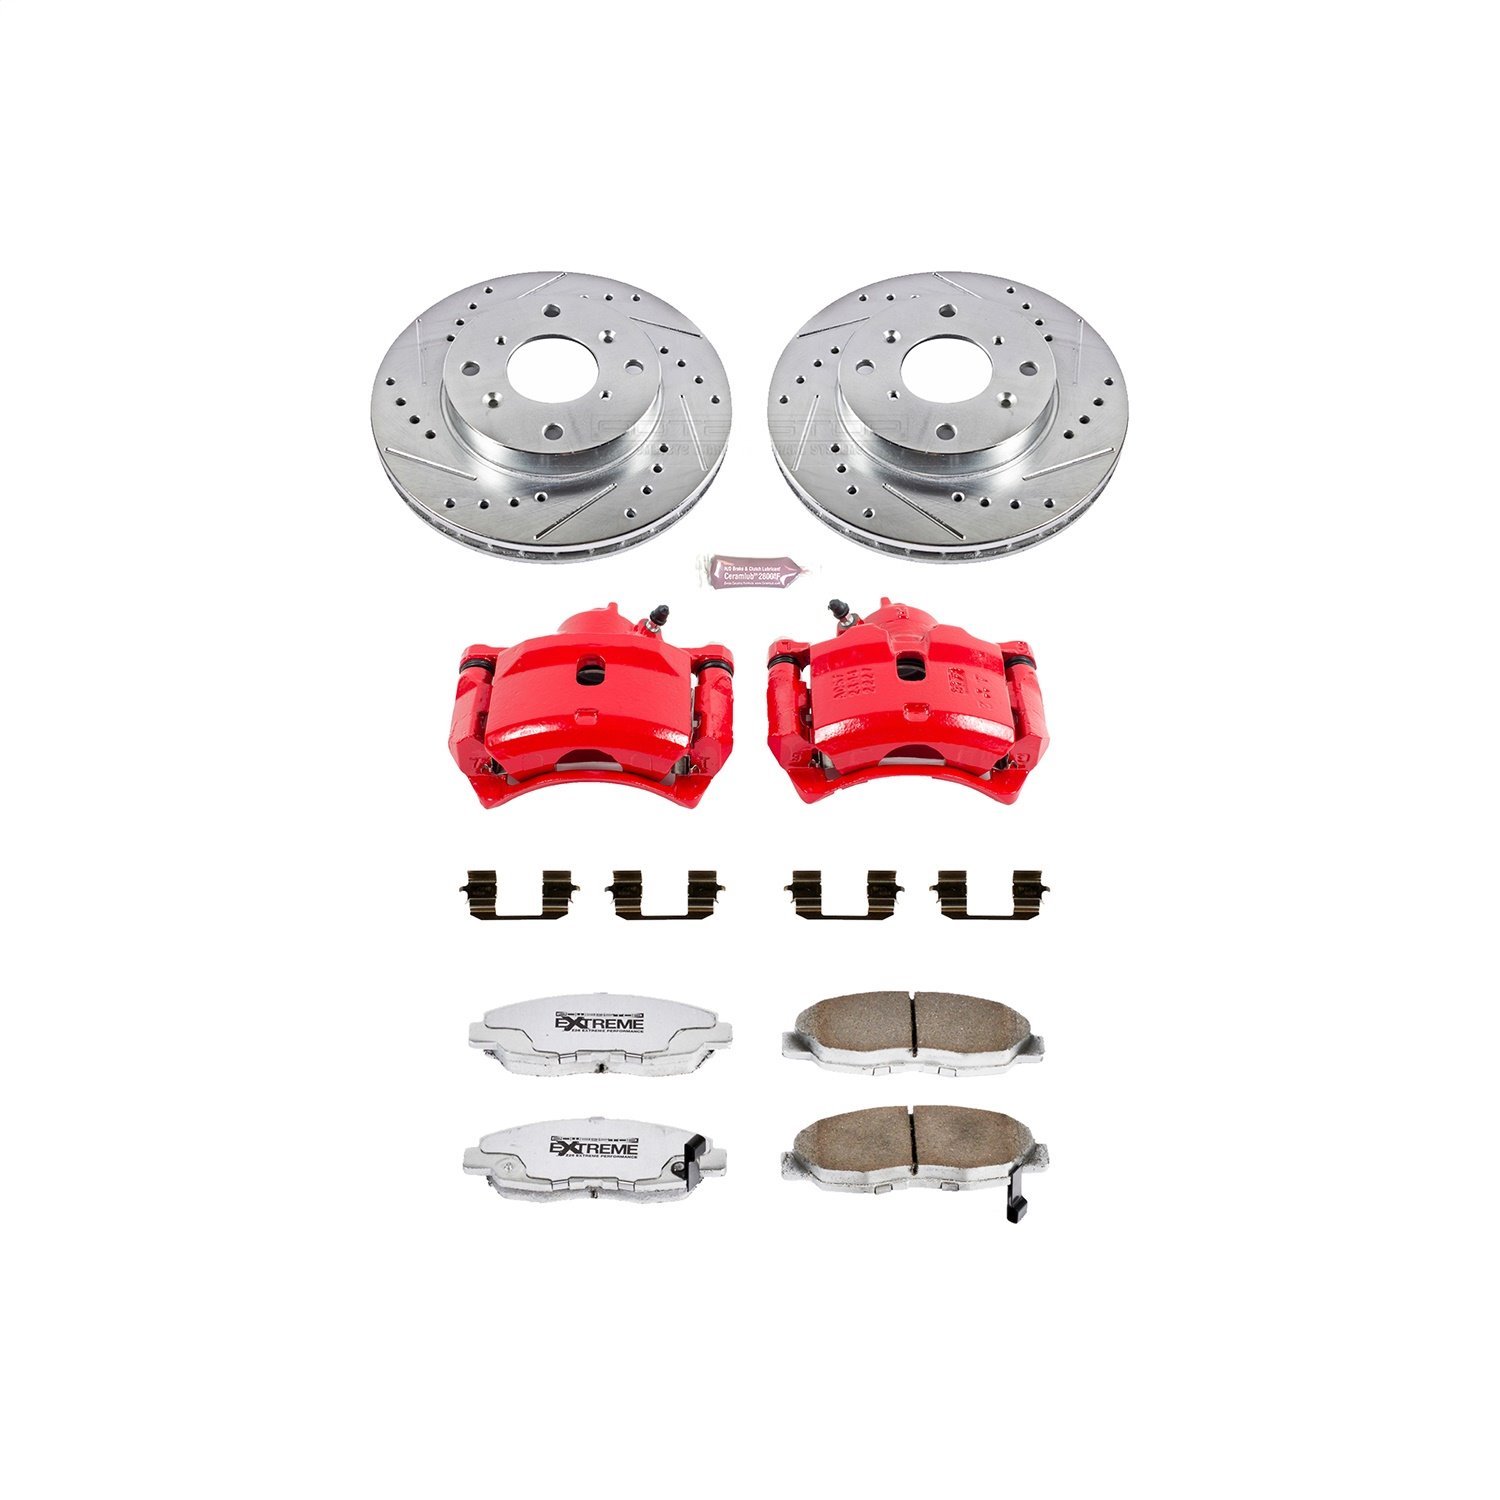 Street Warrior Brake Upgrade Kit Cross-Drilled and Slotted